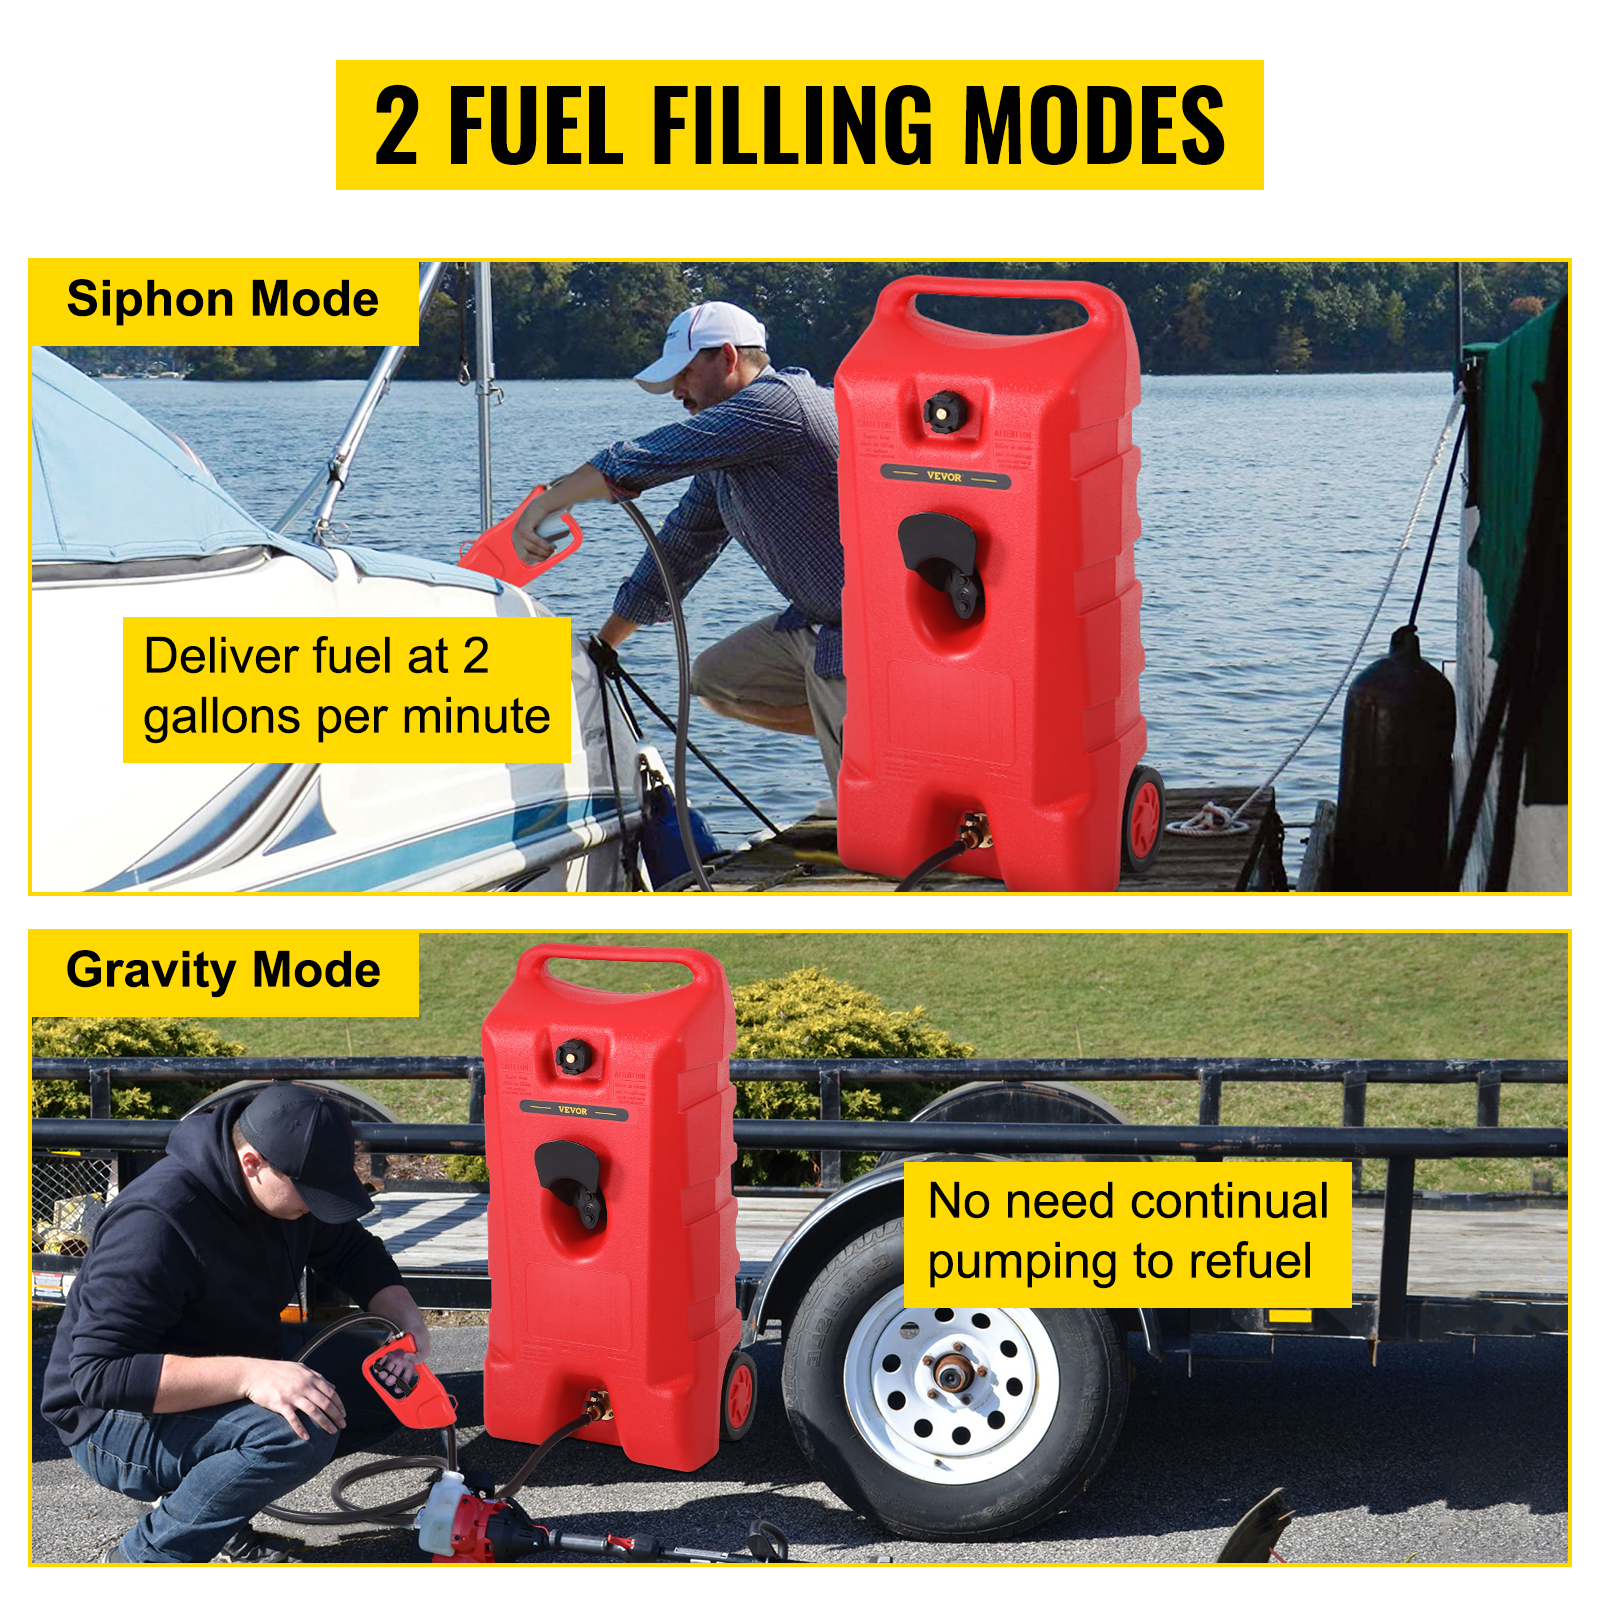 VEVOR Fuel Caddy, 25 Gallon, Gas Storage Tank on-Wheels, with Siphon Pump  and 9.8 ft Long Hose, Gasoline Diesel Fuel Container for Cars, Lawn Mowers,  ATVs, Boats, More, Red